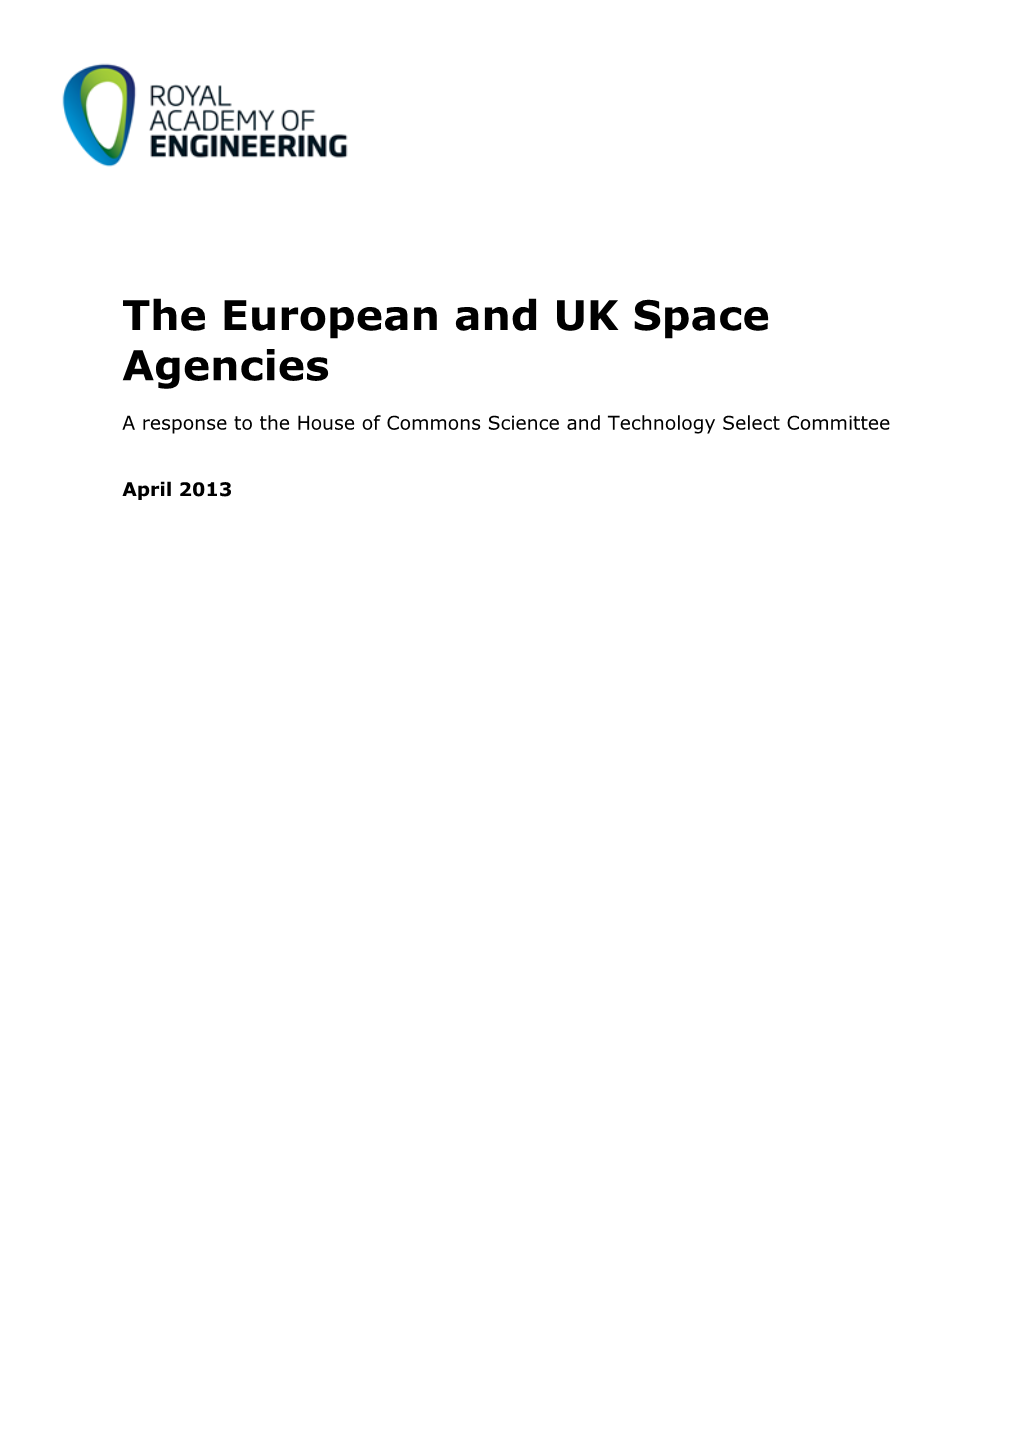 The European and UK Space Agencies